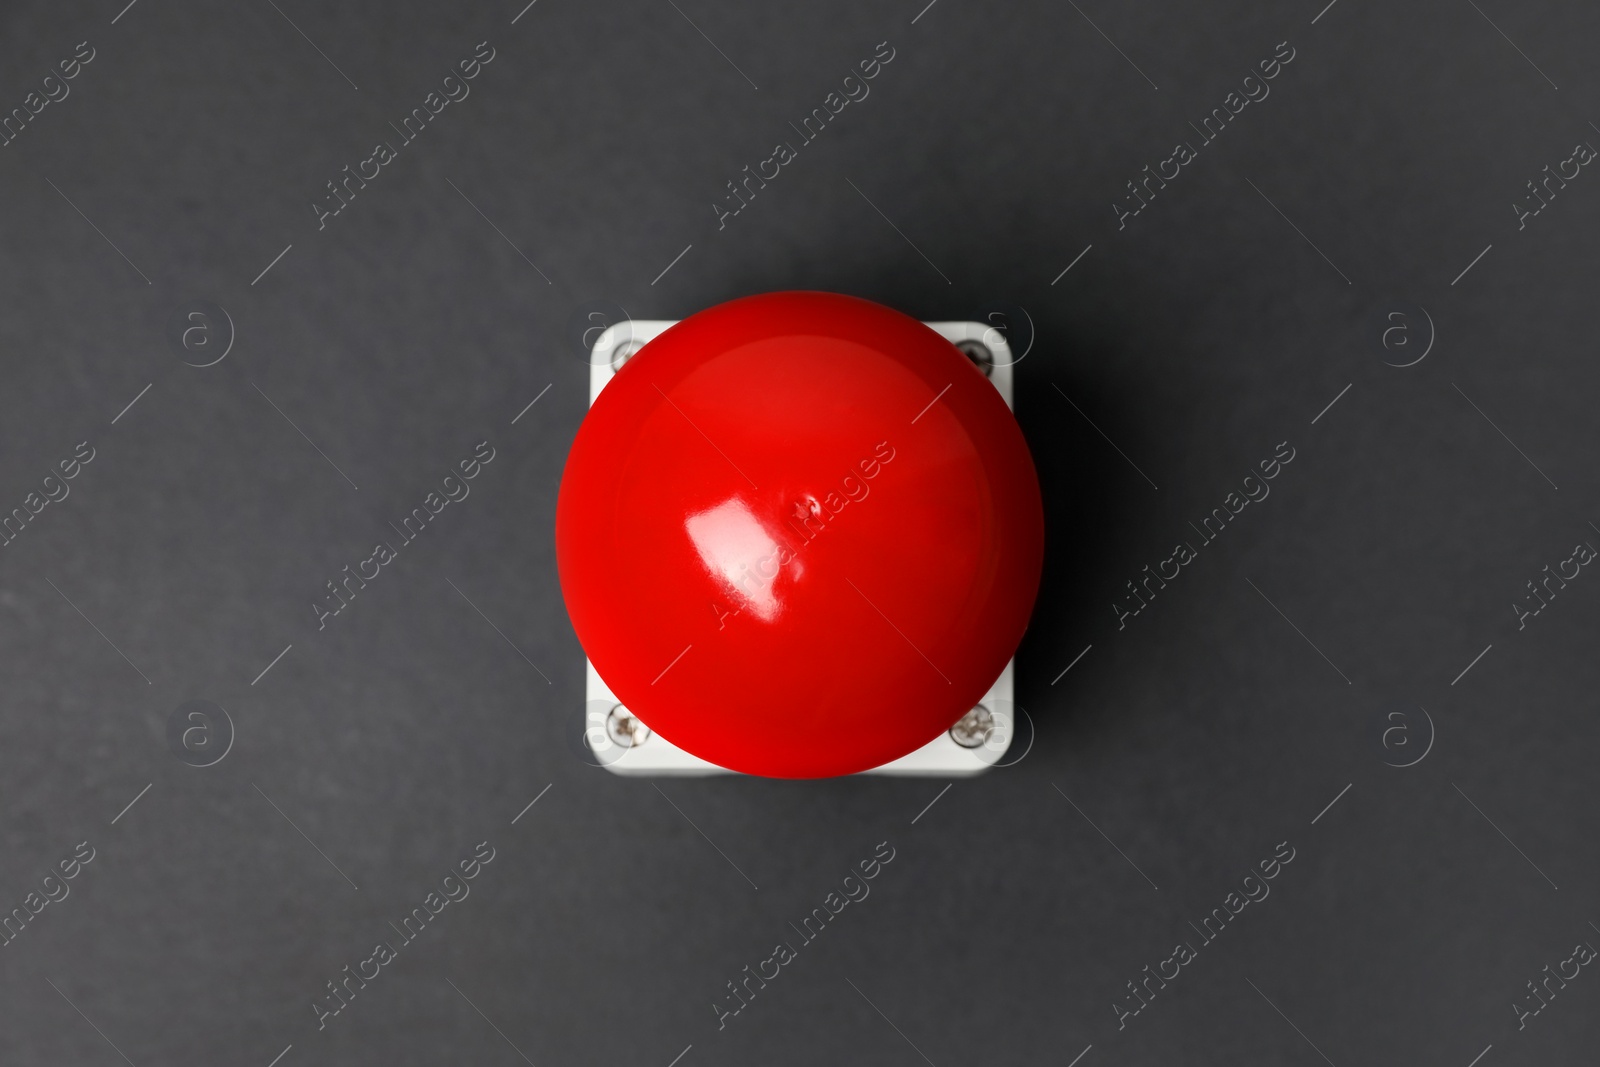 Photo of Red button of nuclear weapon on grey background, top view. War concept